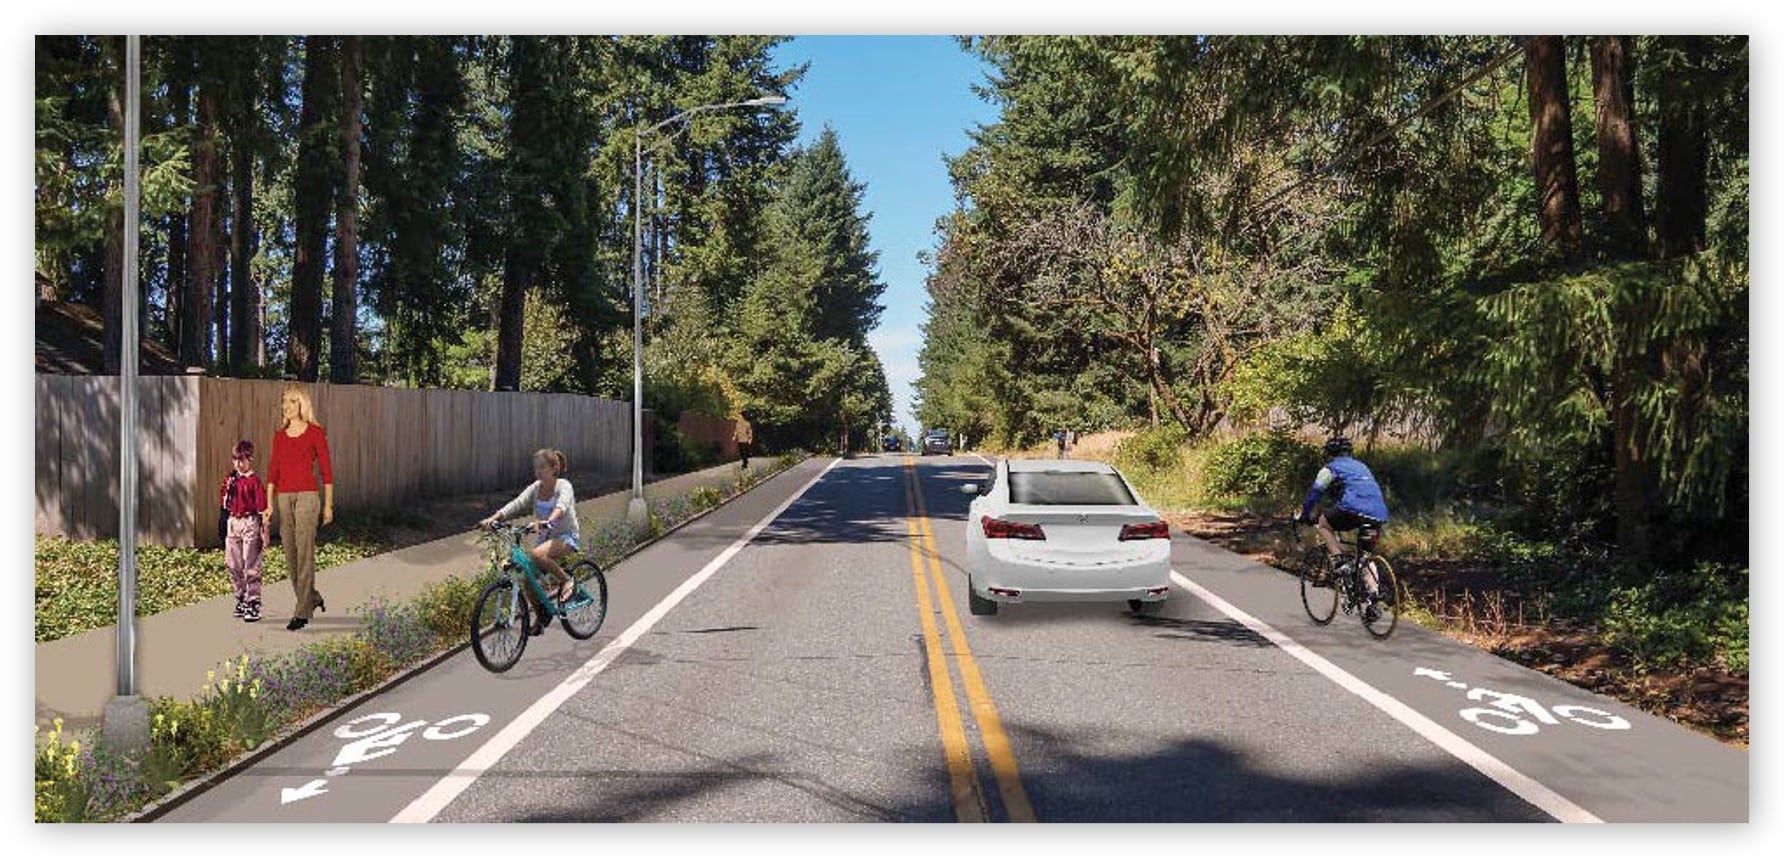 An artist's rendering of 38th Street after bike lanes and a sidewalk are added.